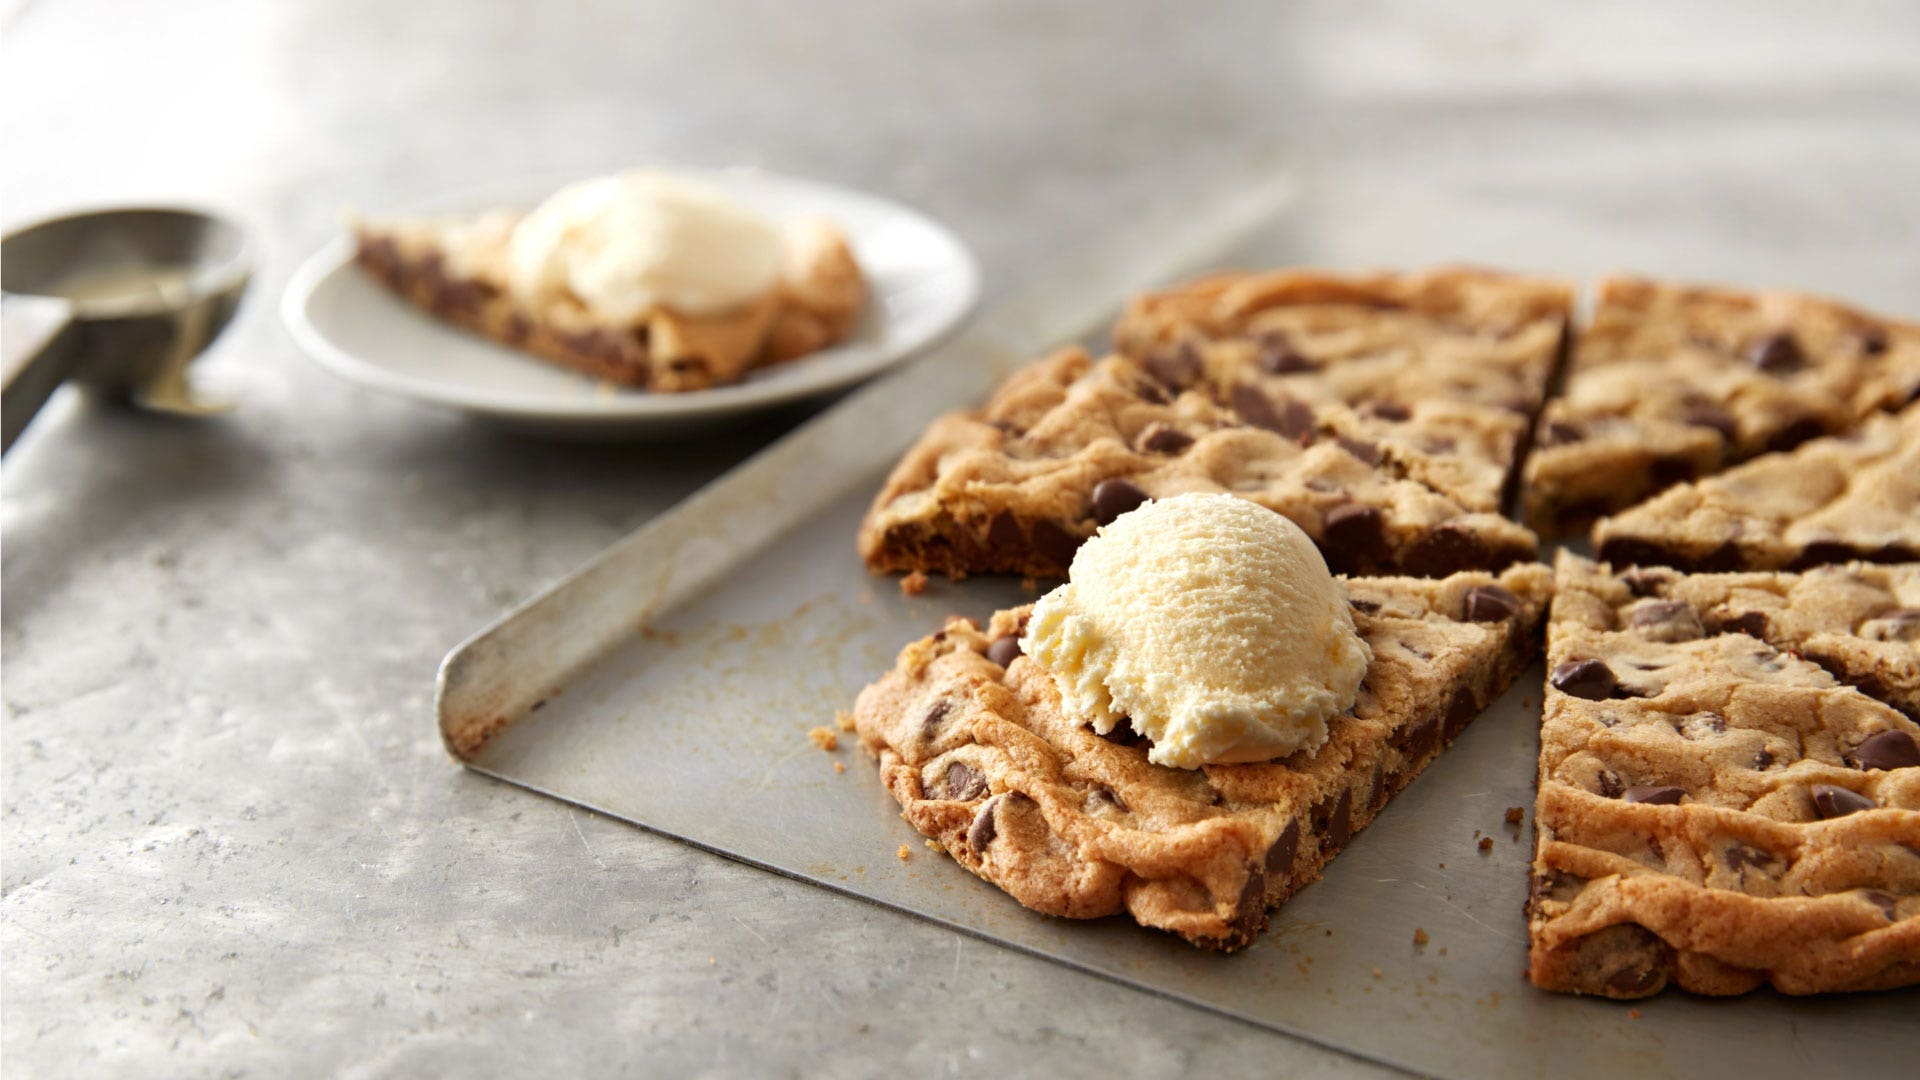 5 Fun Twists on the Classic Chocolate Chip Cookie